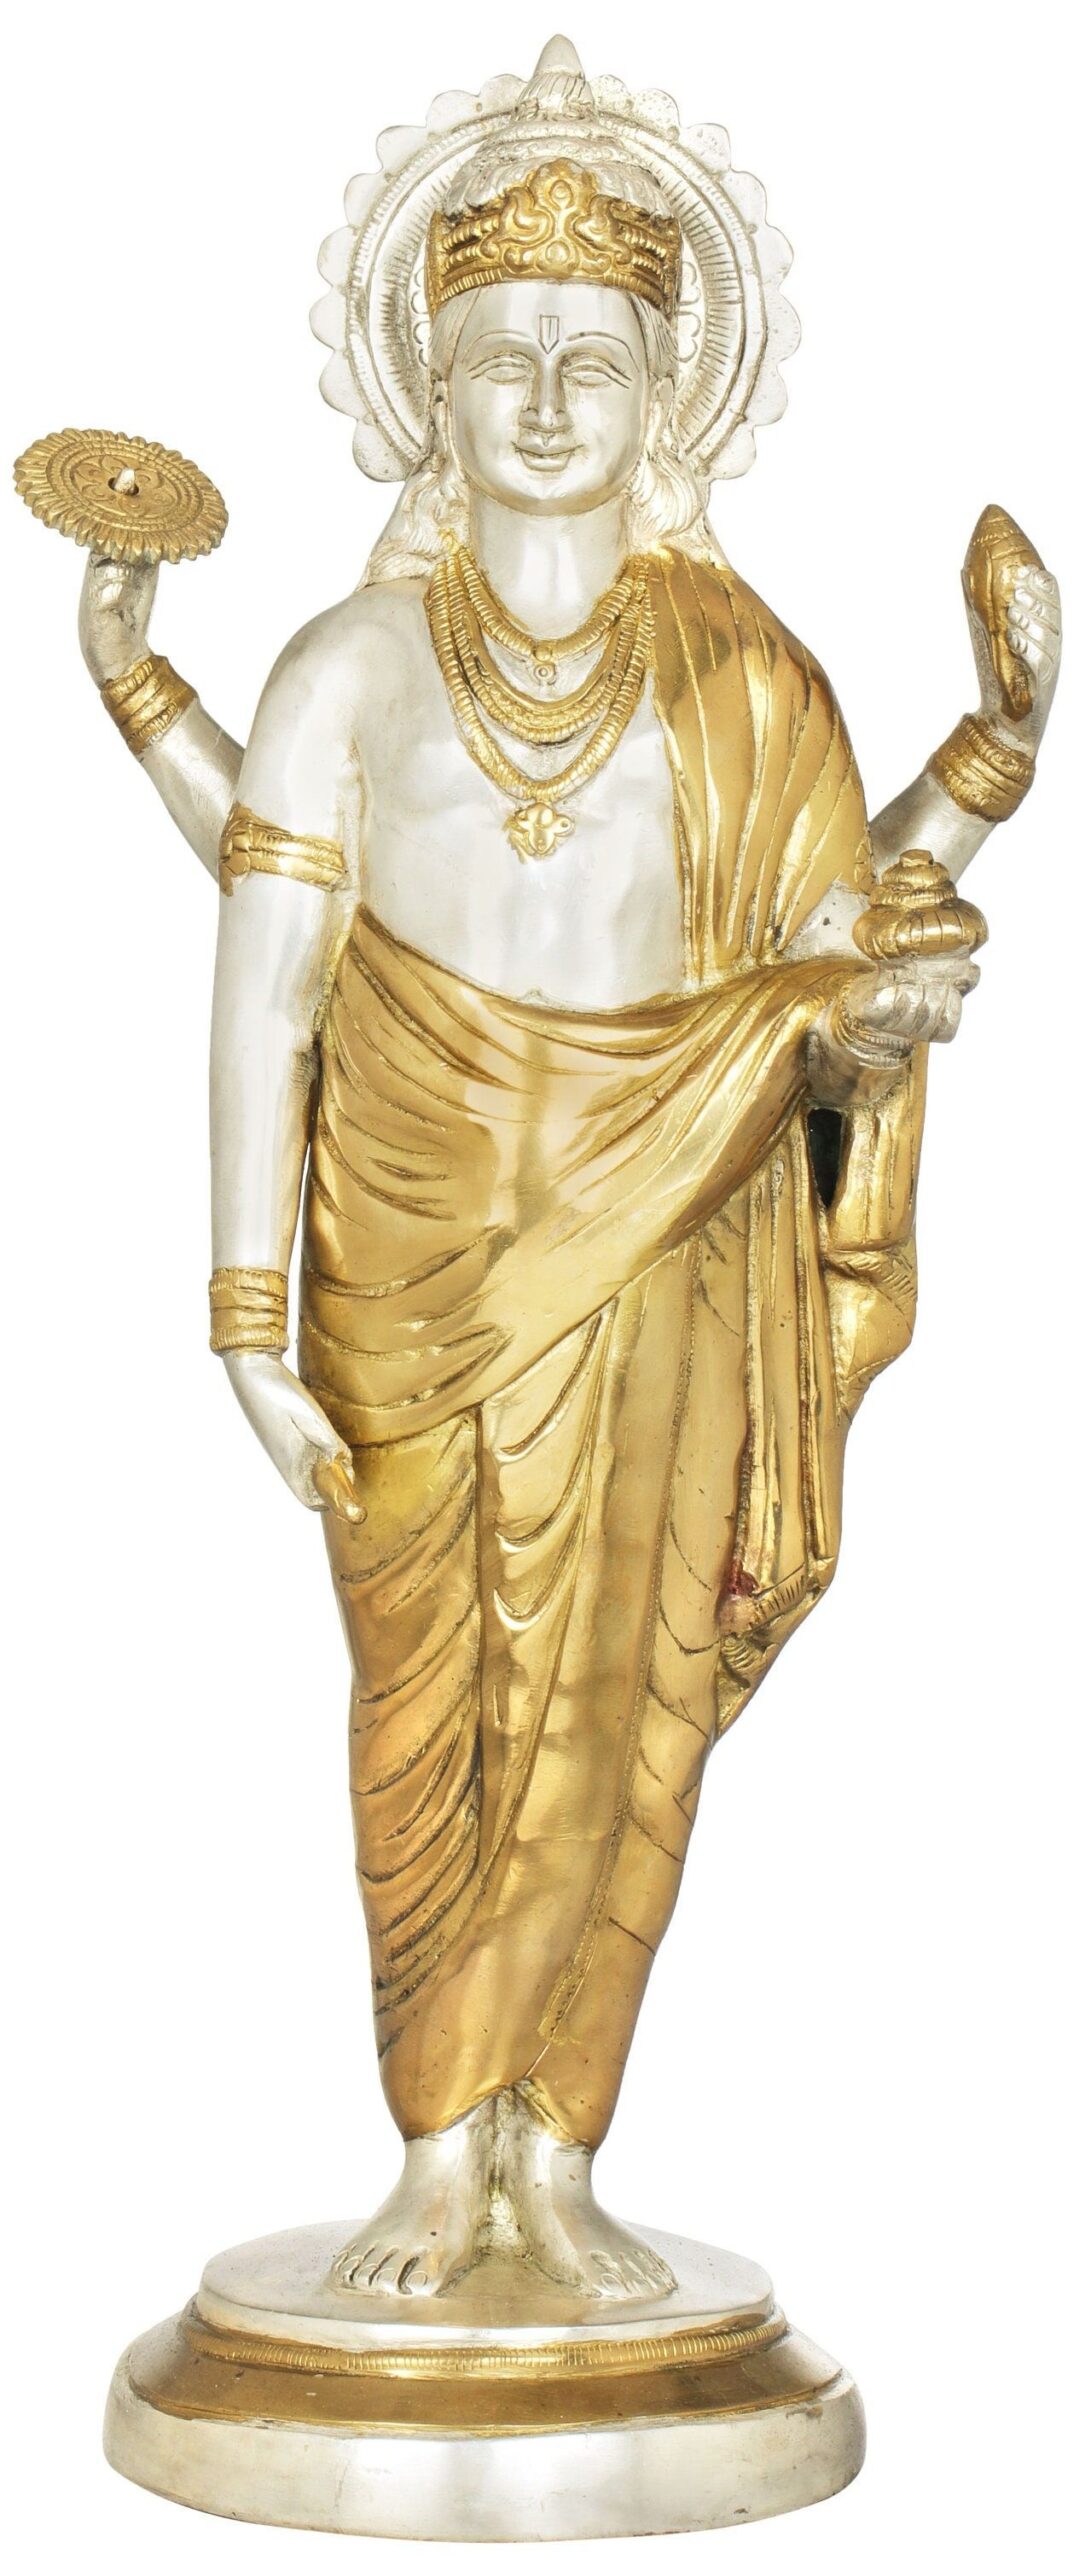 "18" Dhanvantari - The Physician of the Gods (Holding the Vase and Herbs of Imm